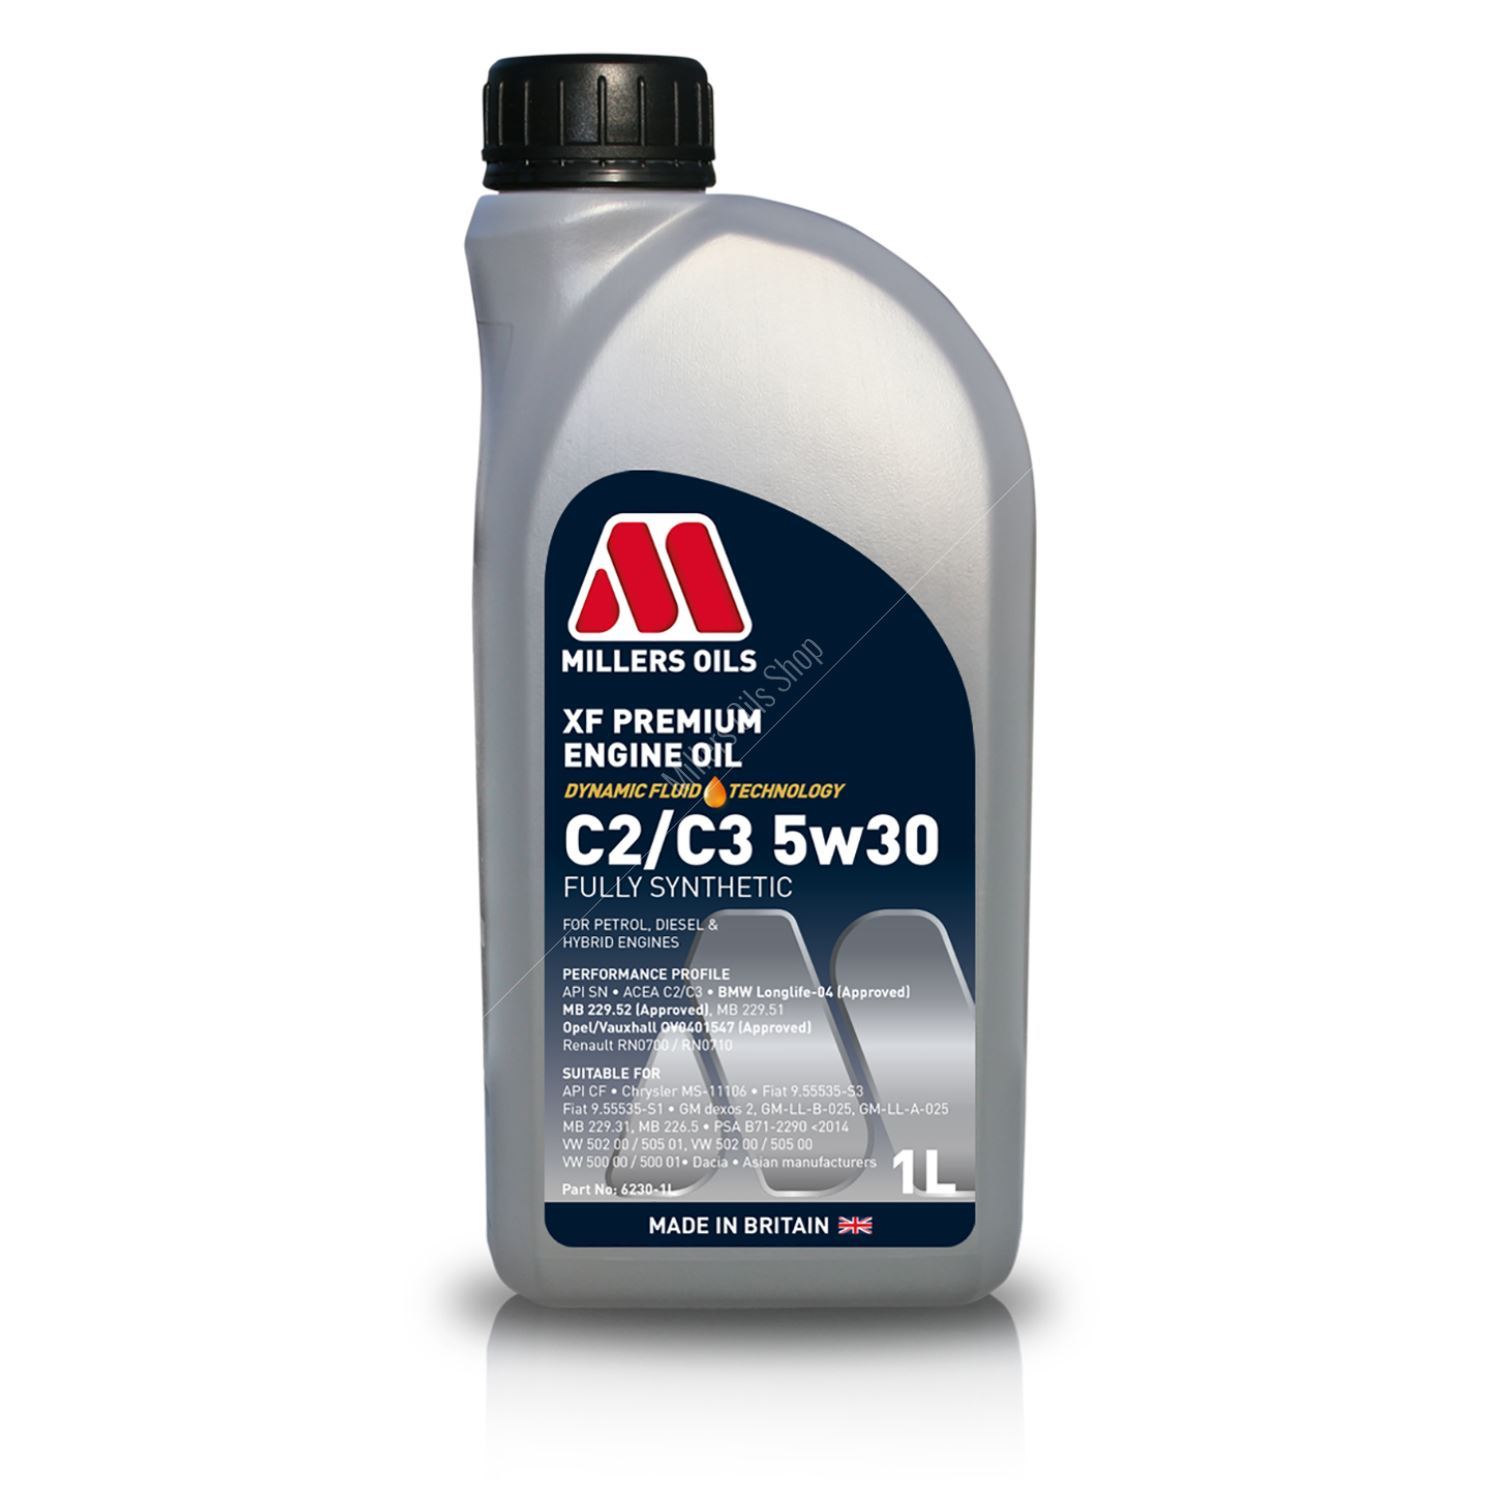 Millers Oils XF Premium 5w40 C3 SN Dexos 2 Fully Synthetic Engine Oil